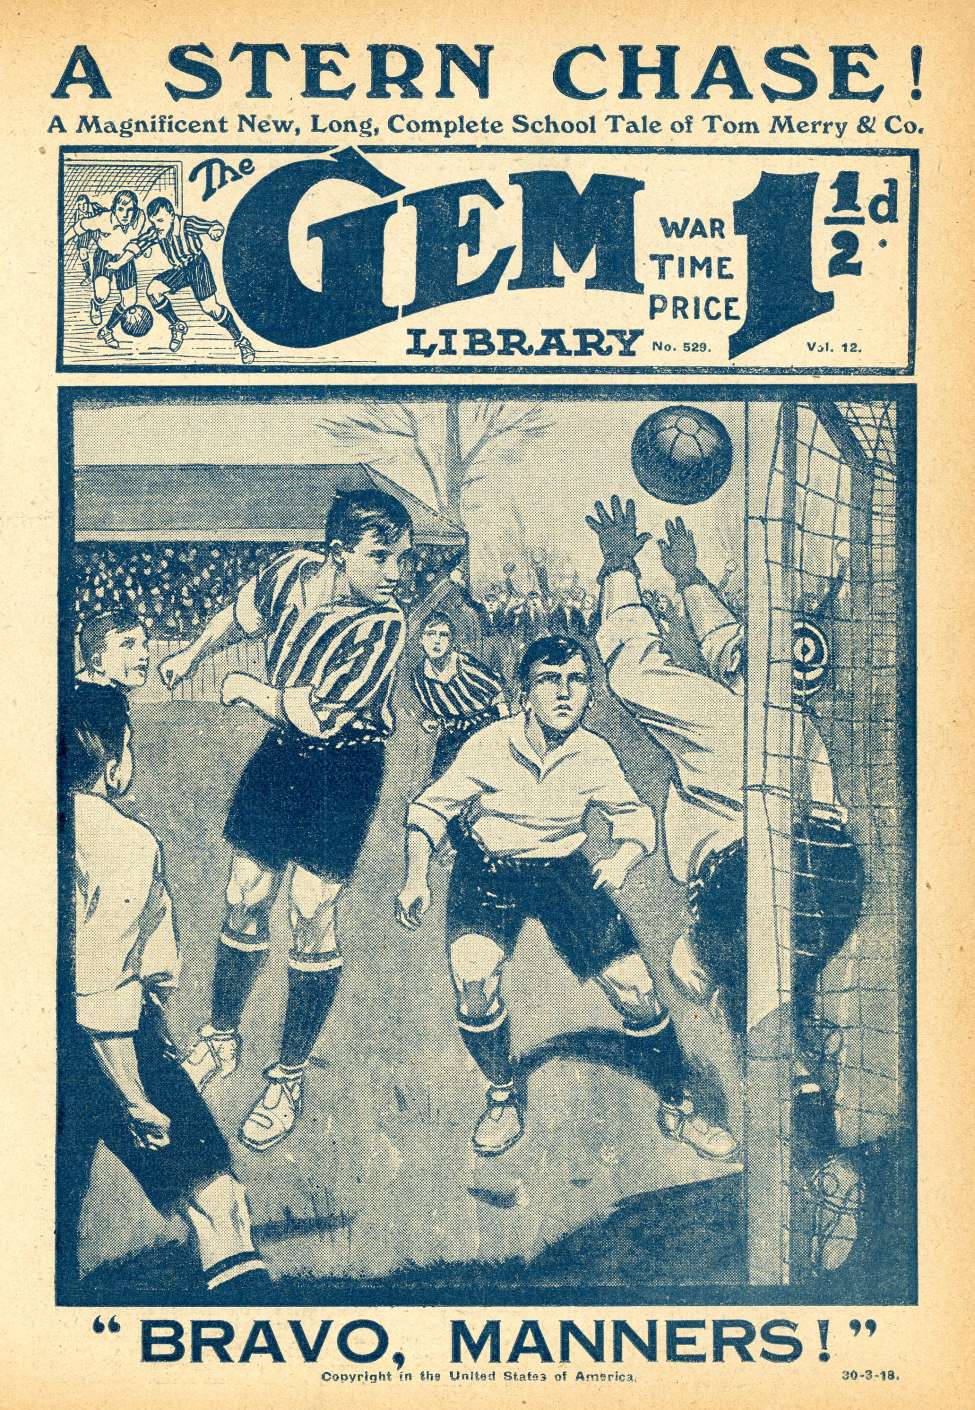 Comic Book Cover For The Gem v2 529 - A Stern Chase